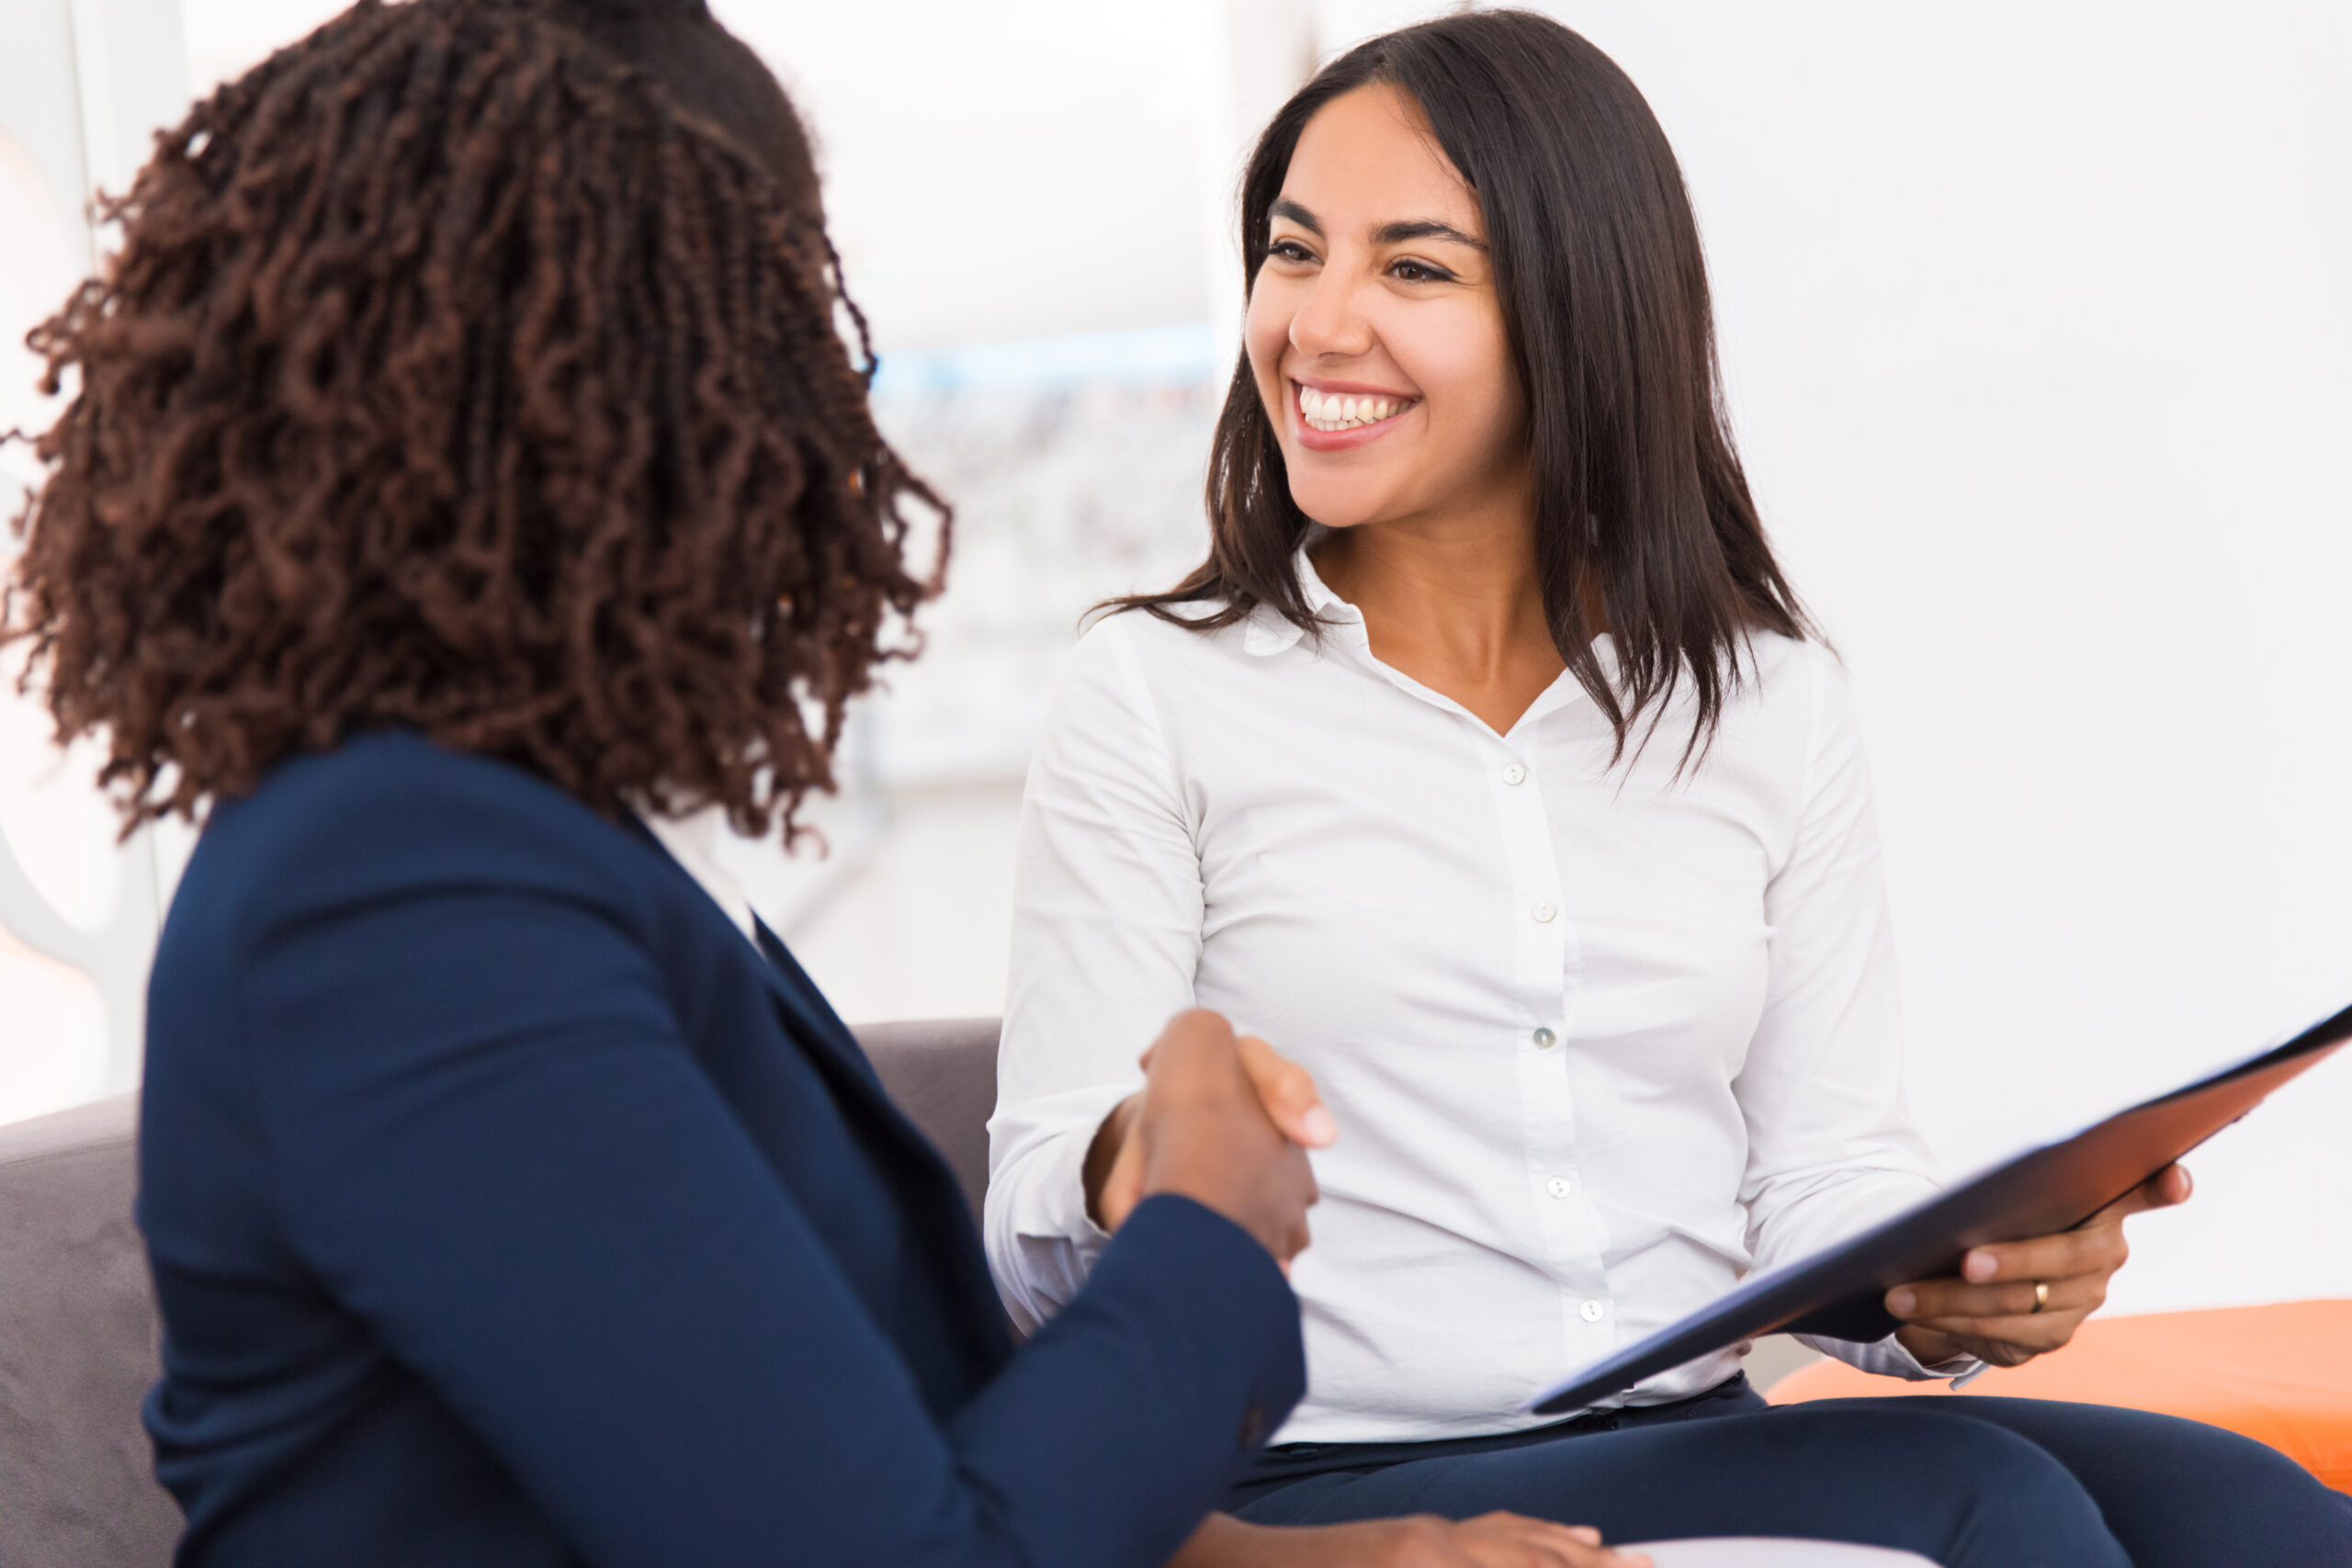 Happy diverse business partners closing deal. Businesswomen sitting on couch, holding folder with documents, shaking hands and smiling. Agreement concept